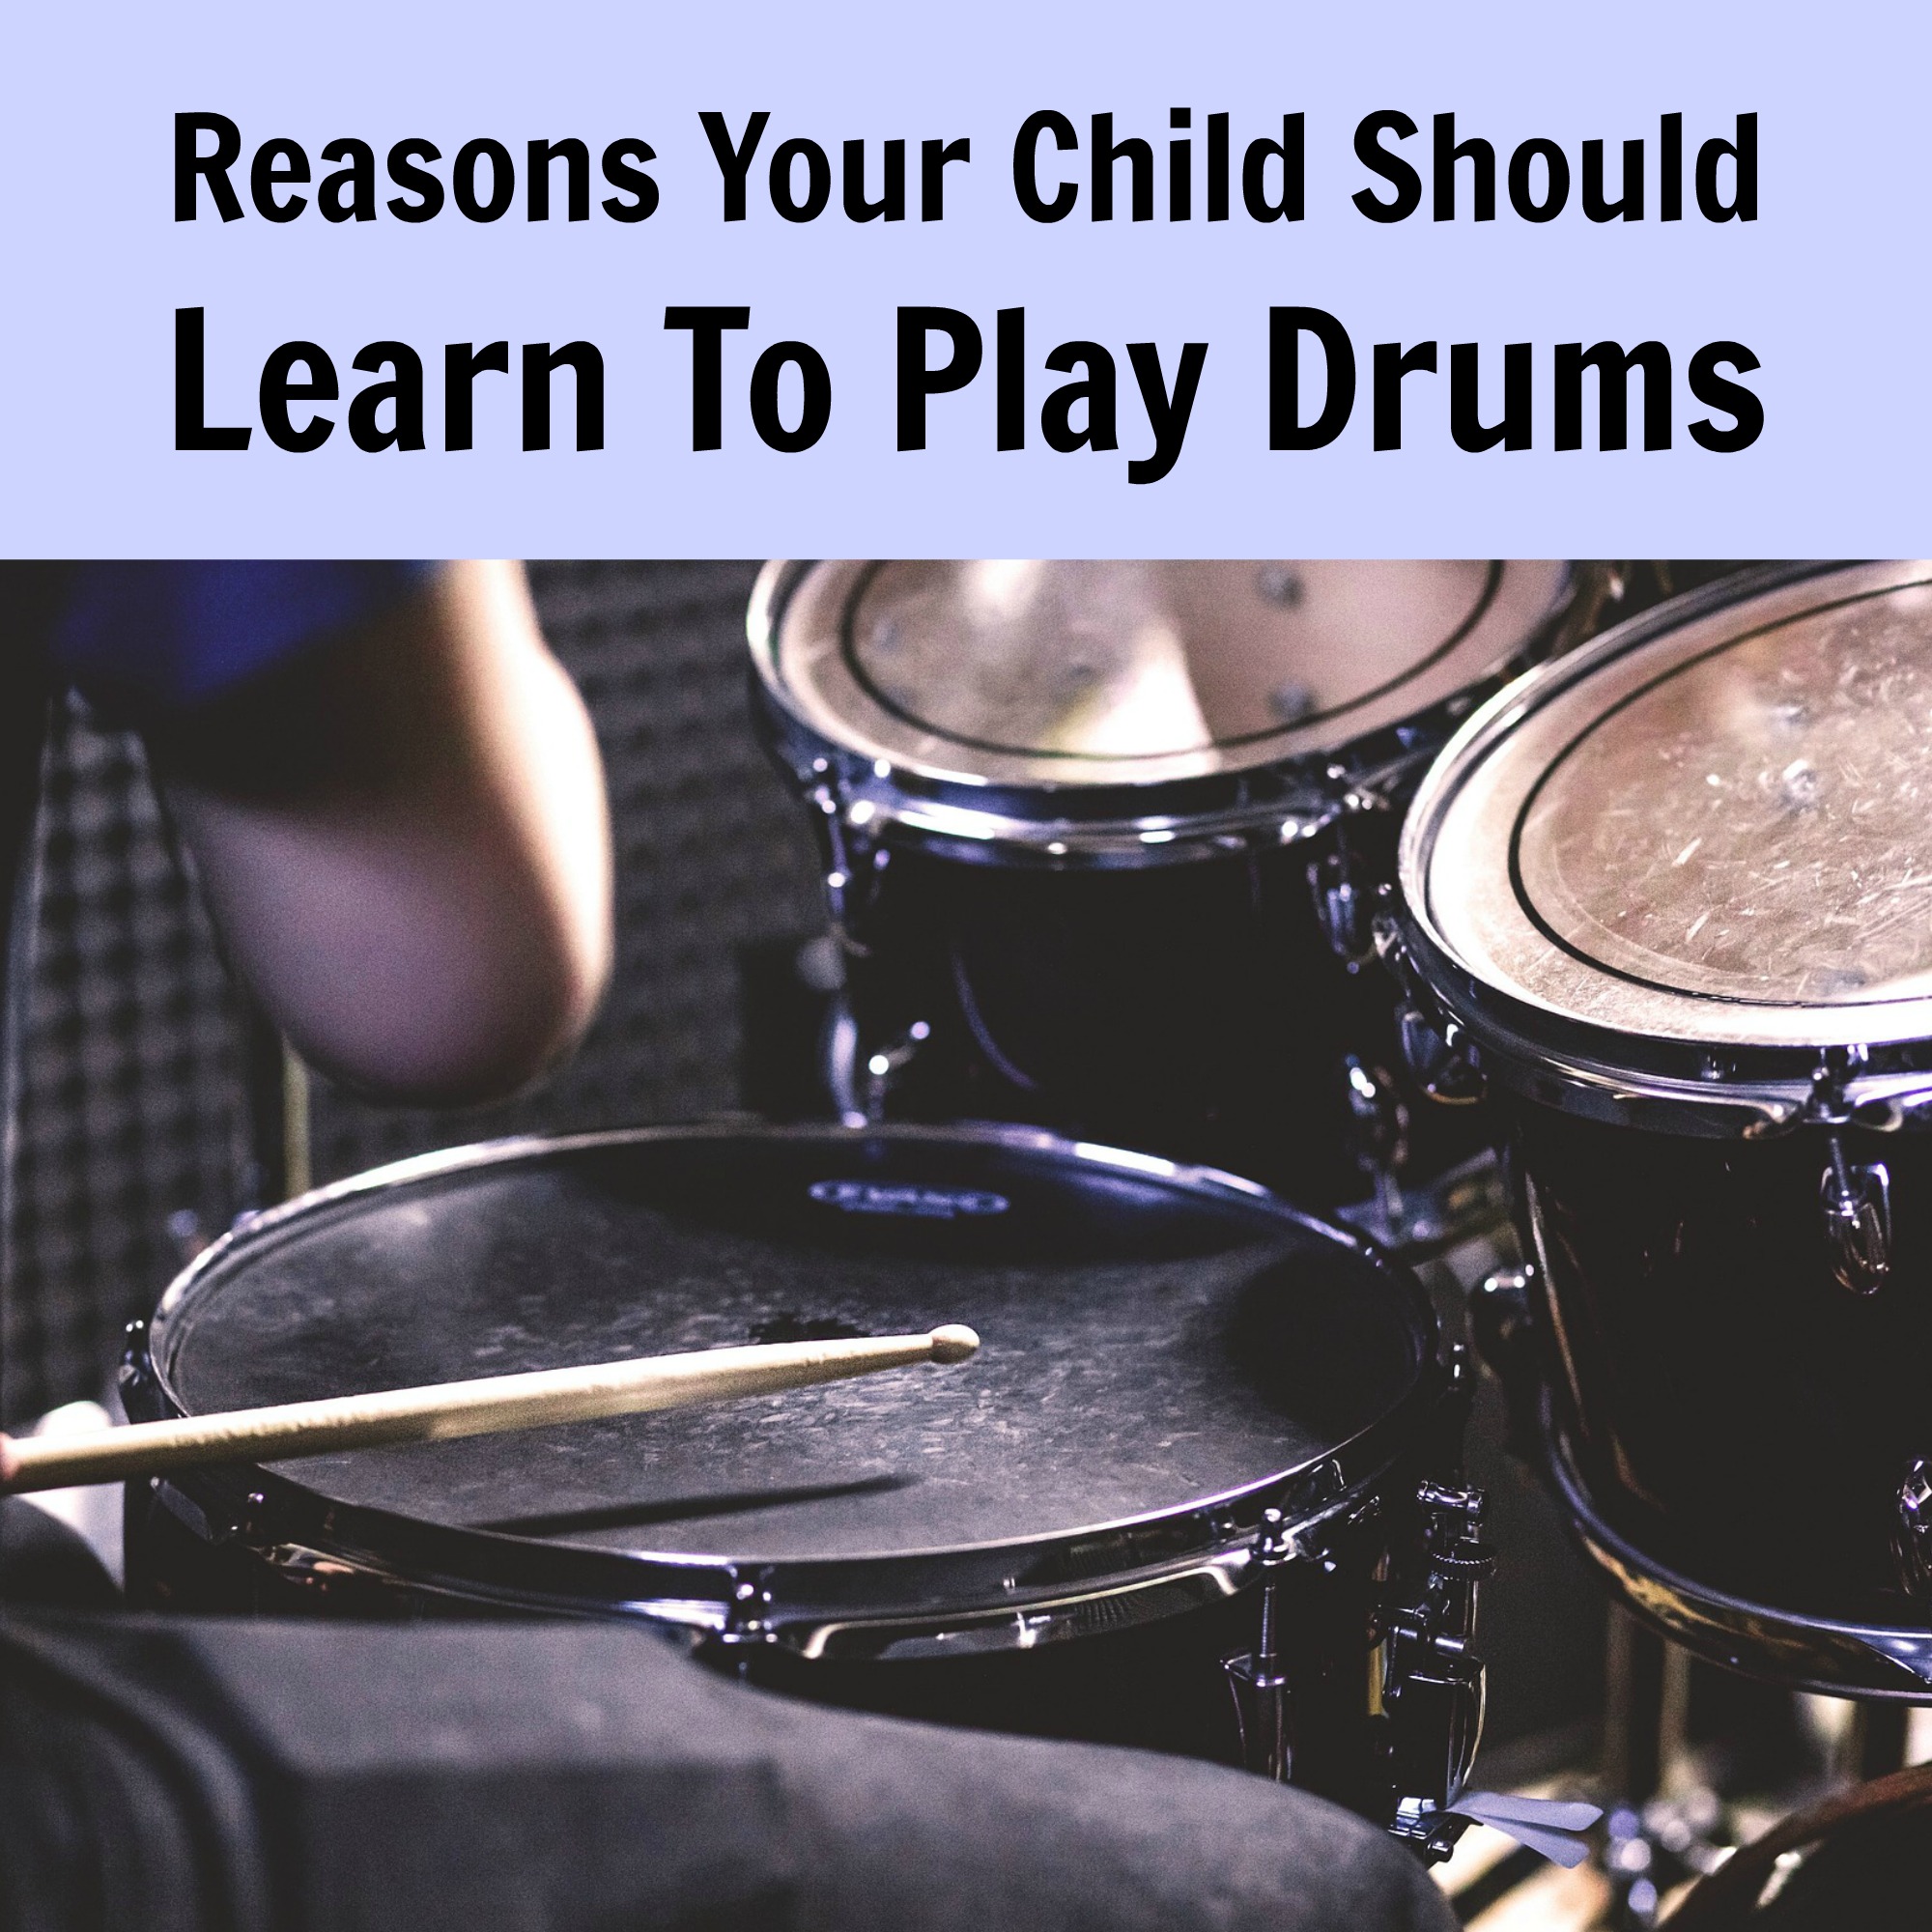 Reasons Your Child Should Learn To Play Drums